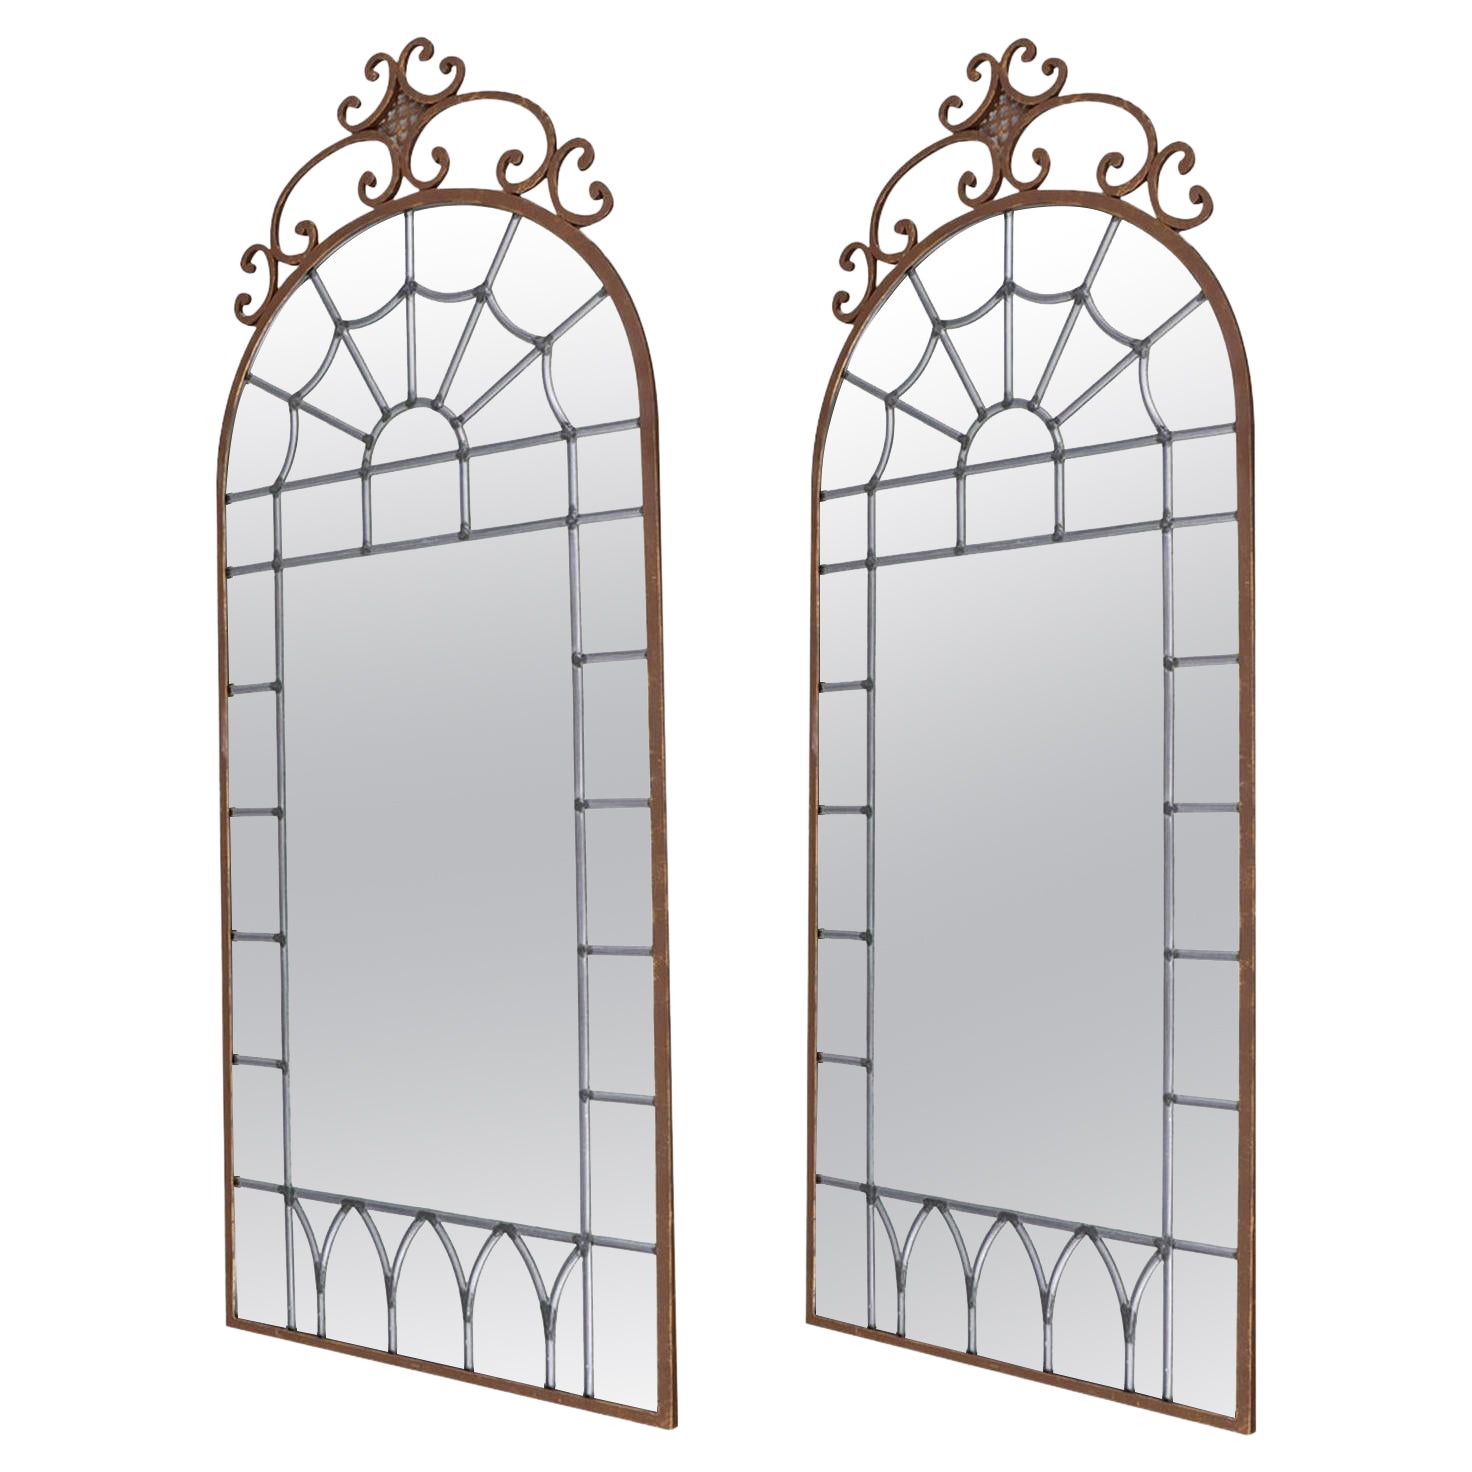 19th Century French Empire Pair of Metal Wall Glass Mirrors, Parisian Décor For Sale